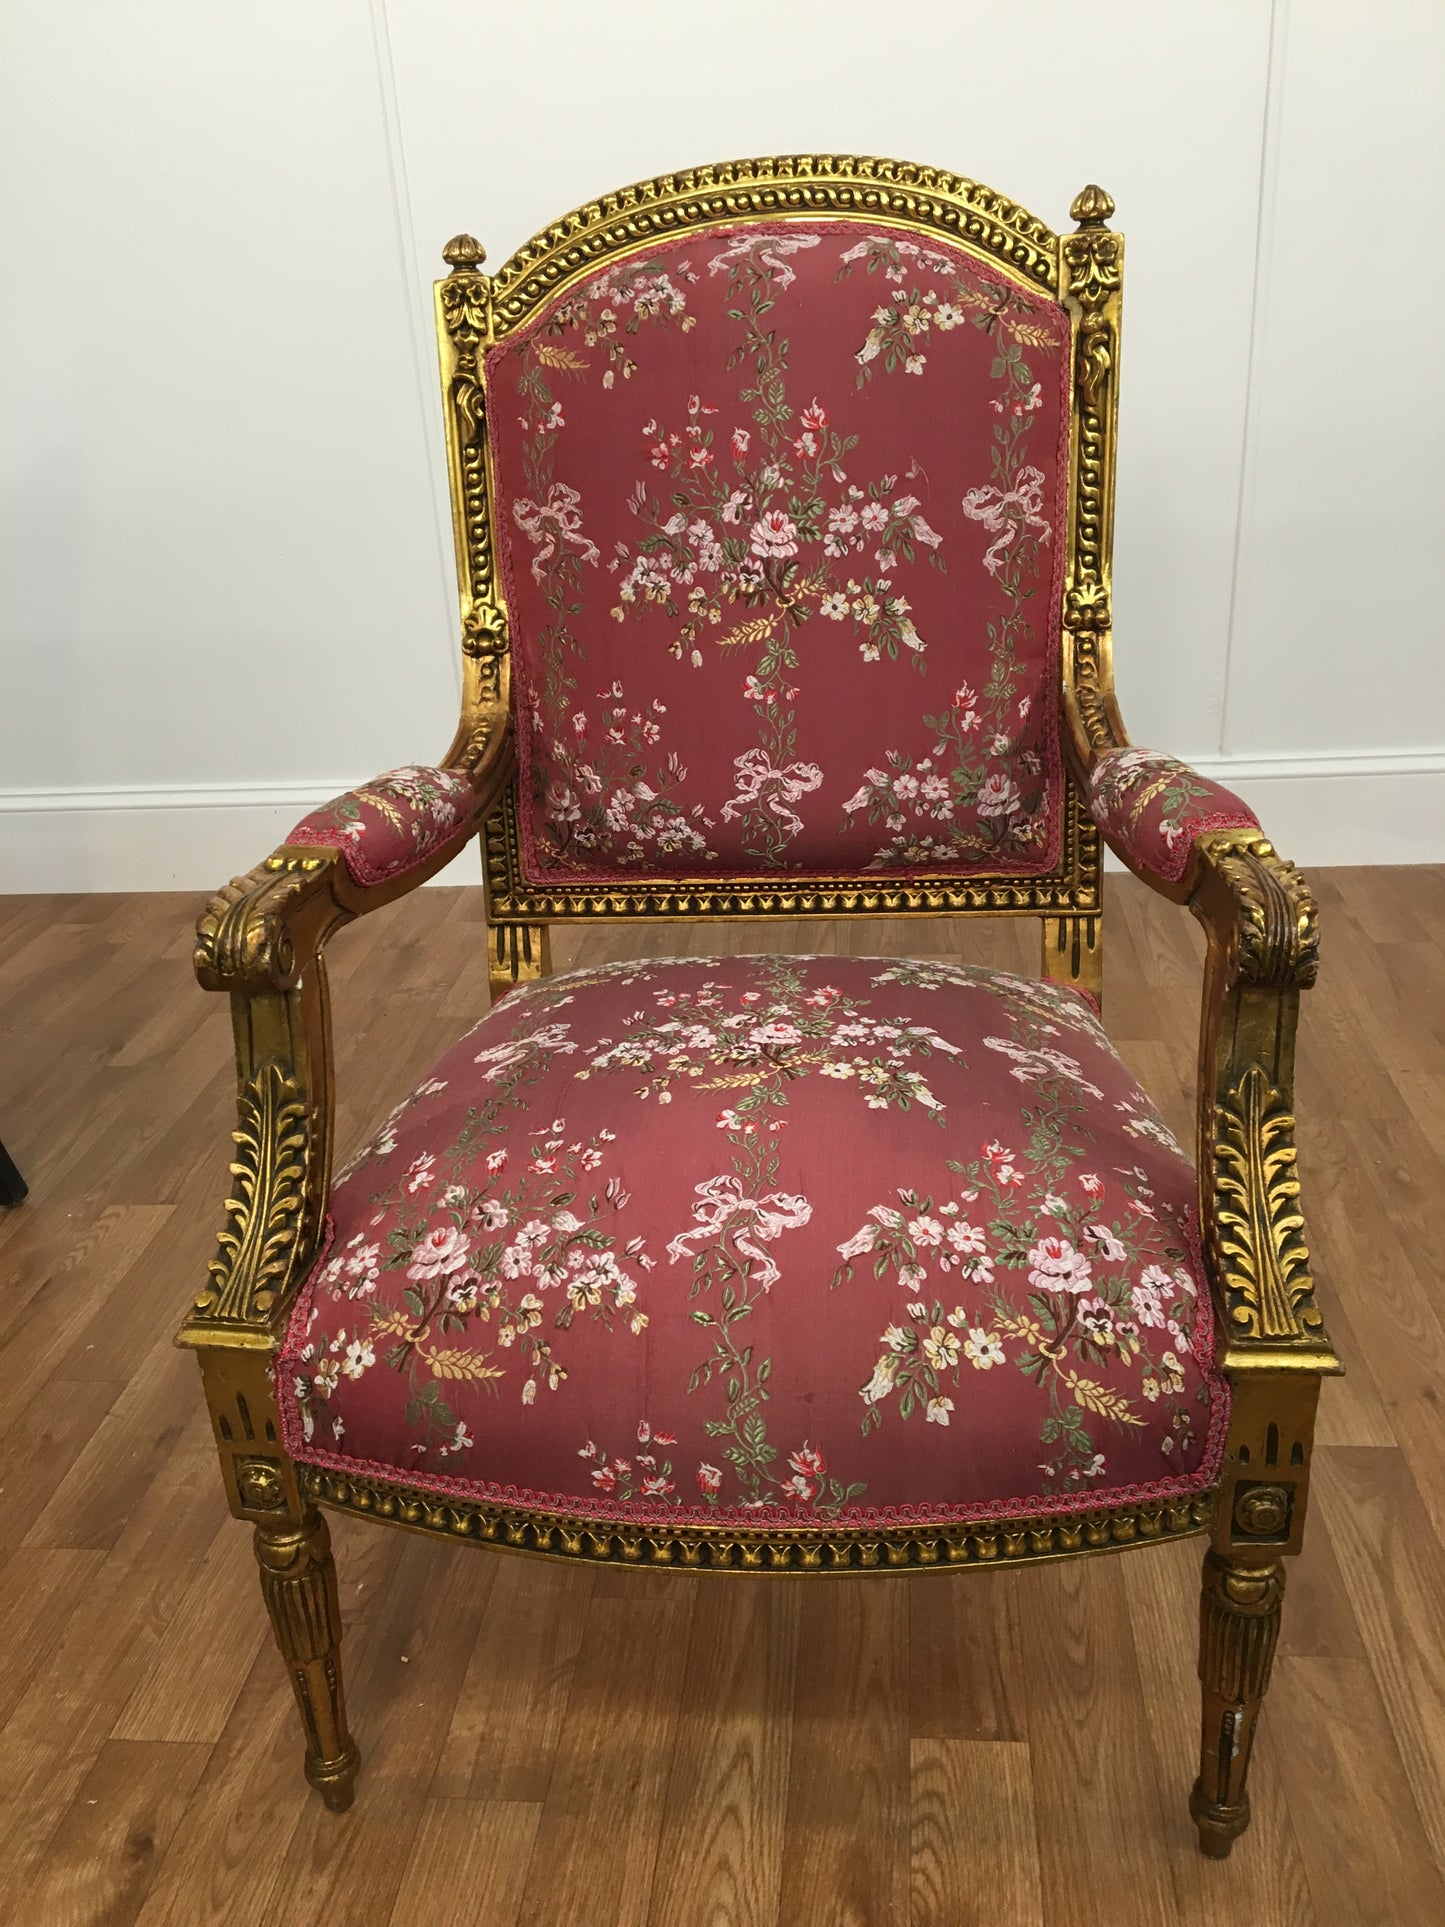 ORNATE RED FLORAL PATTERN OPEN ARM CHAIRS